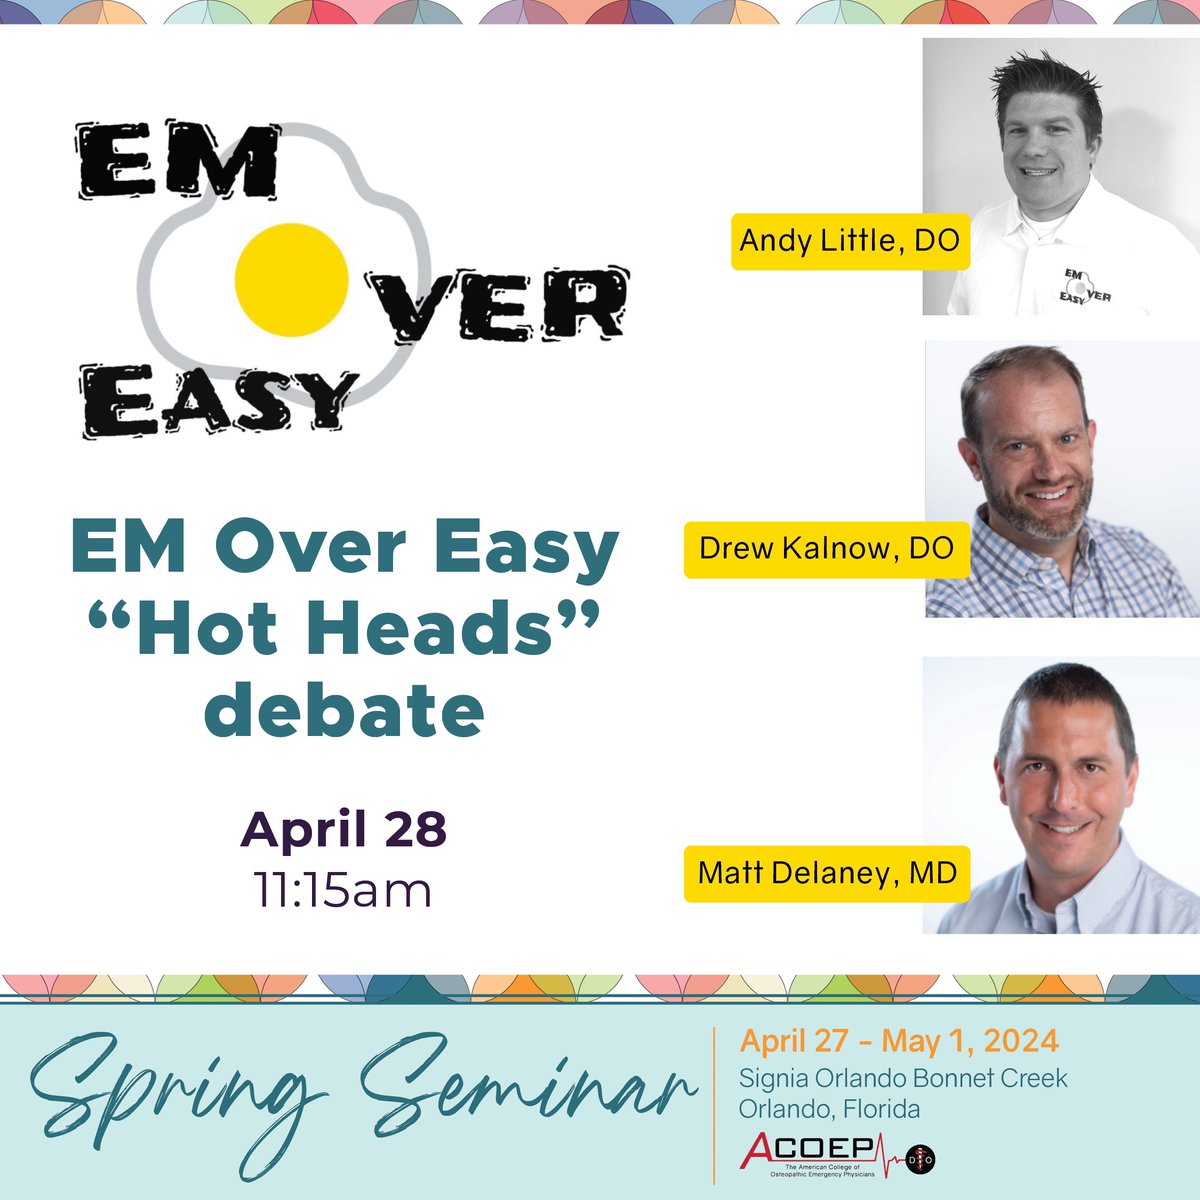 Get ready for EM Over Easy 'Hot Heads' debate as part of the RSO Program! Recording takes place April 29 at 11:15am. Mark your calendars – it's an experience for everyone in emergency medicine. #ACOEP24 #EMOverEasy #EmergencyMedicineEducation #ACOEPEducation